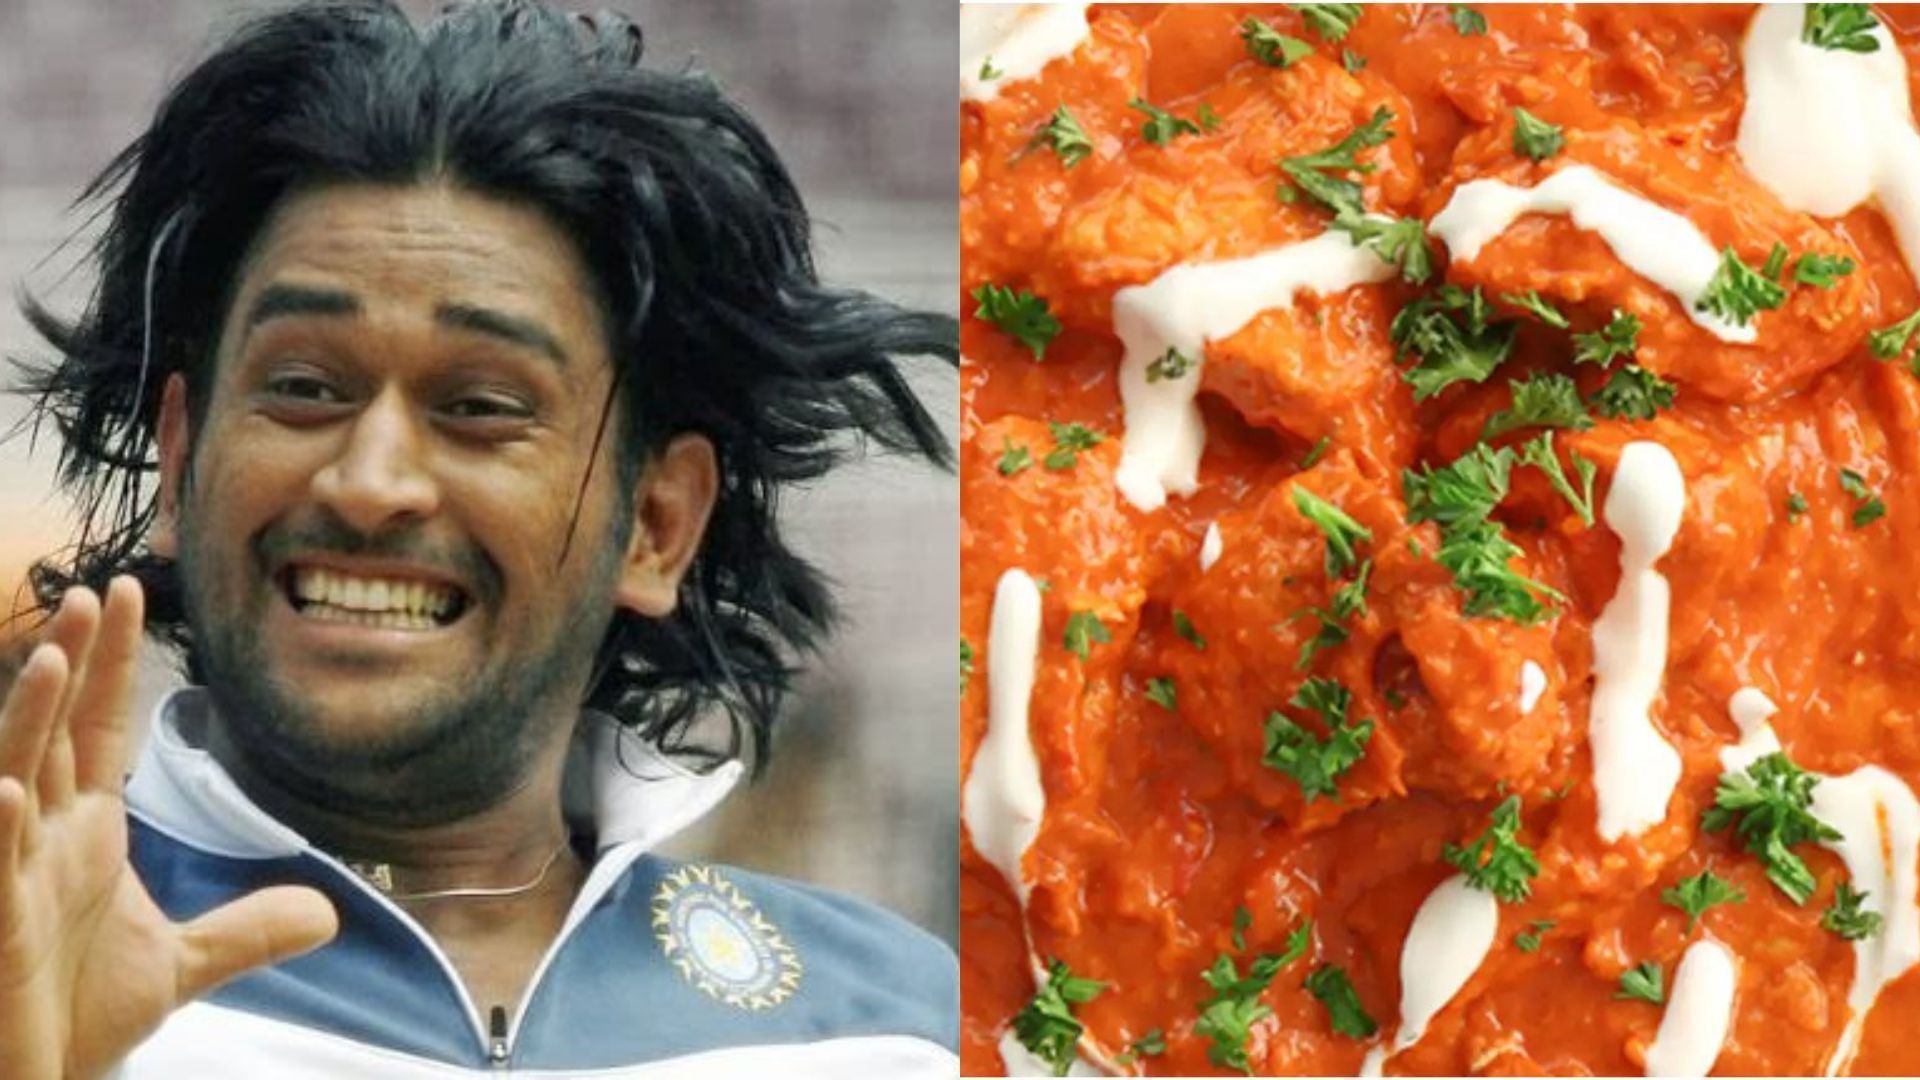 MS Dhoni (L) had a weird way of eating butter chicken, according to Uthappa (P.c.:Twitter)